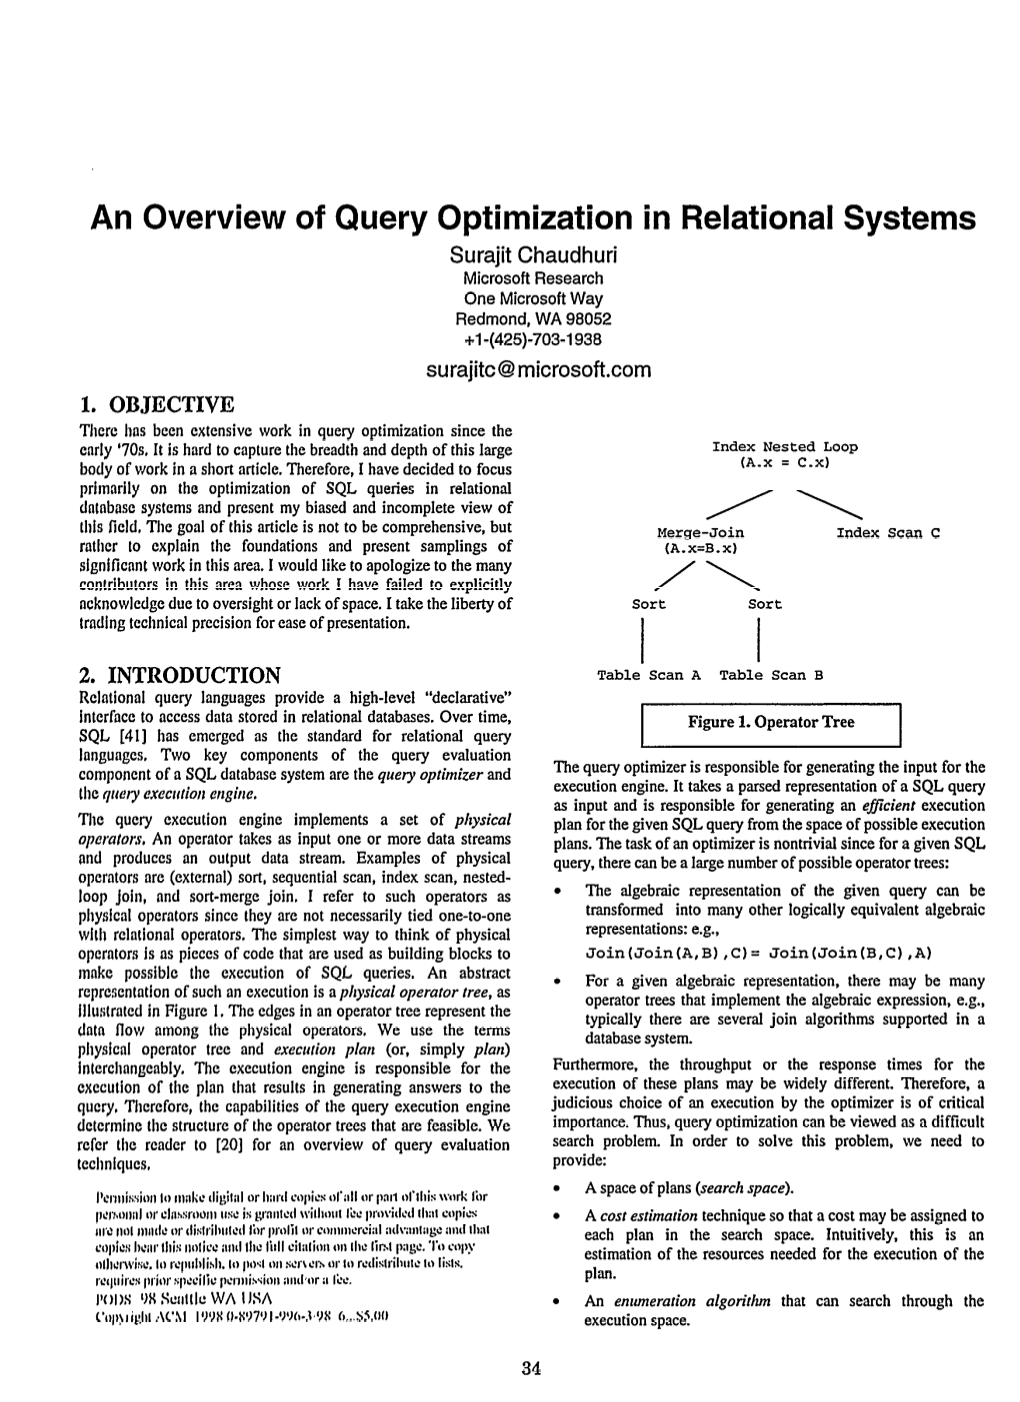 S. Chaudhuri: an Overview of Query Optimization in Relational Systems